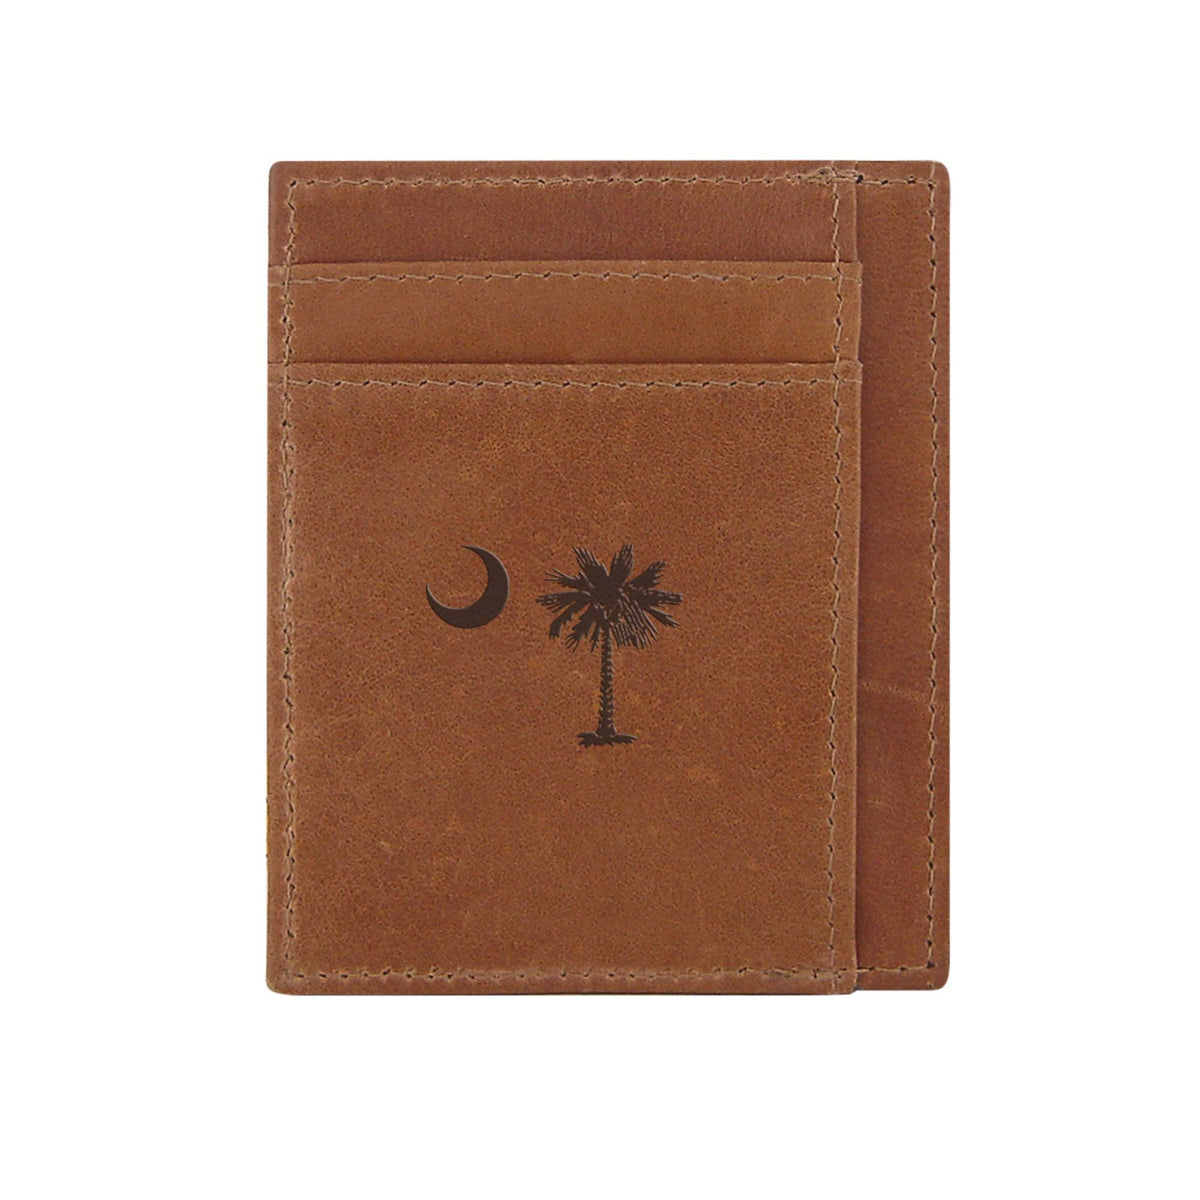 Palmetto Leather Embossed Credit Card Holder